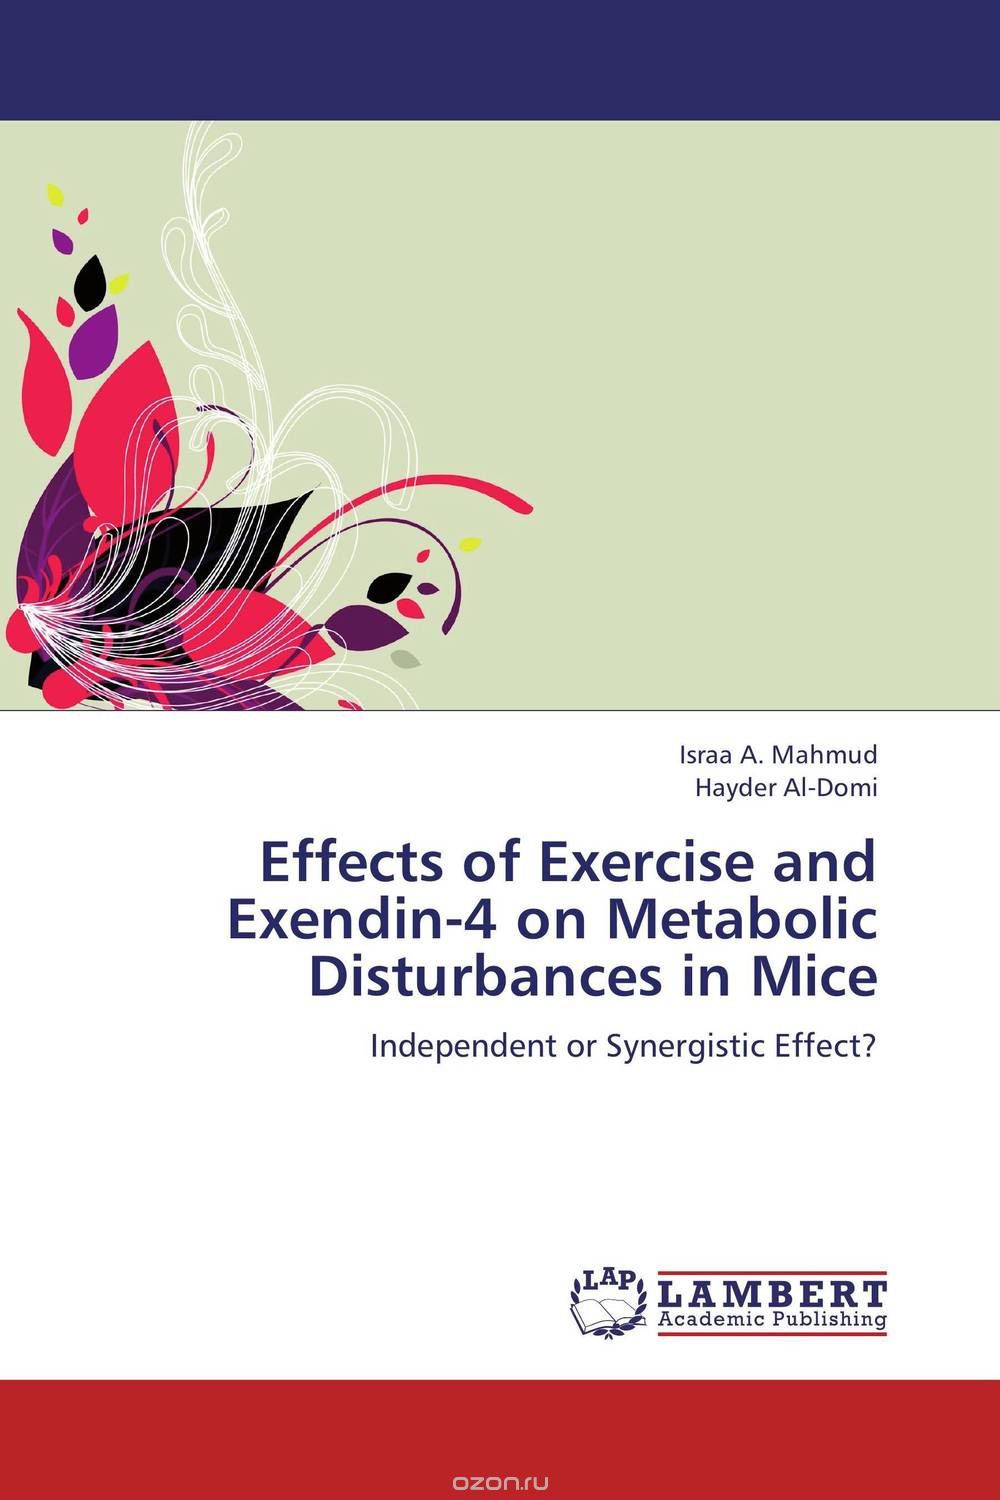 Effects of Exercise and Exendin-4 on Metabolic Disturbances in Mice